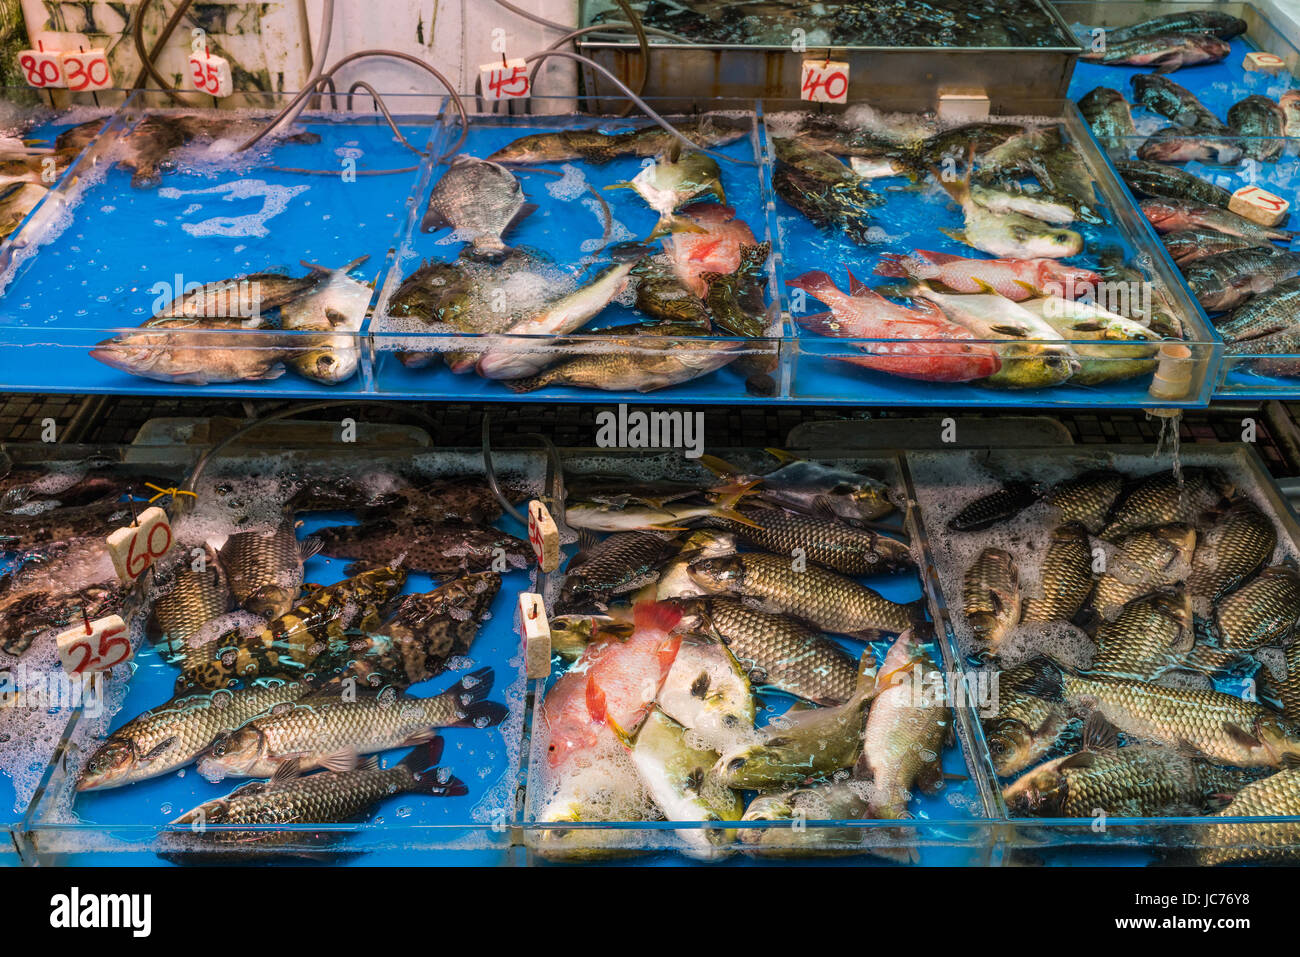 Live fish tank display in a wet market in Hong Kong. Stock Photo